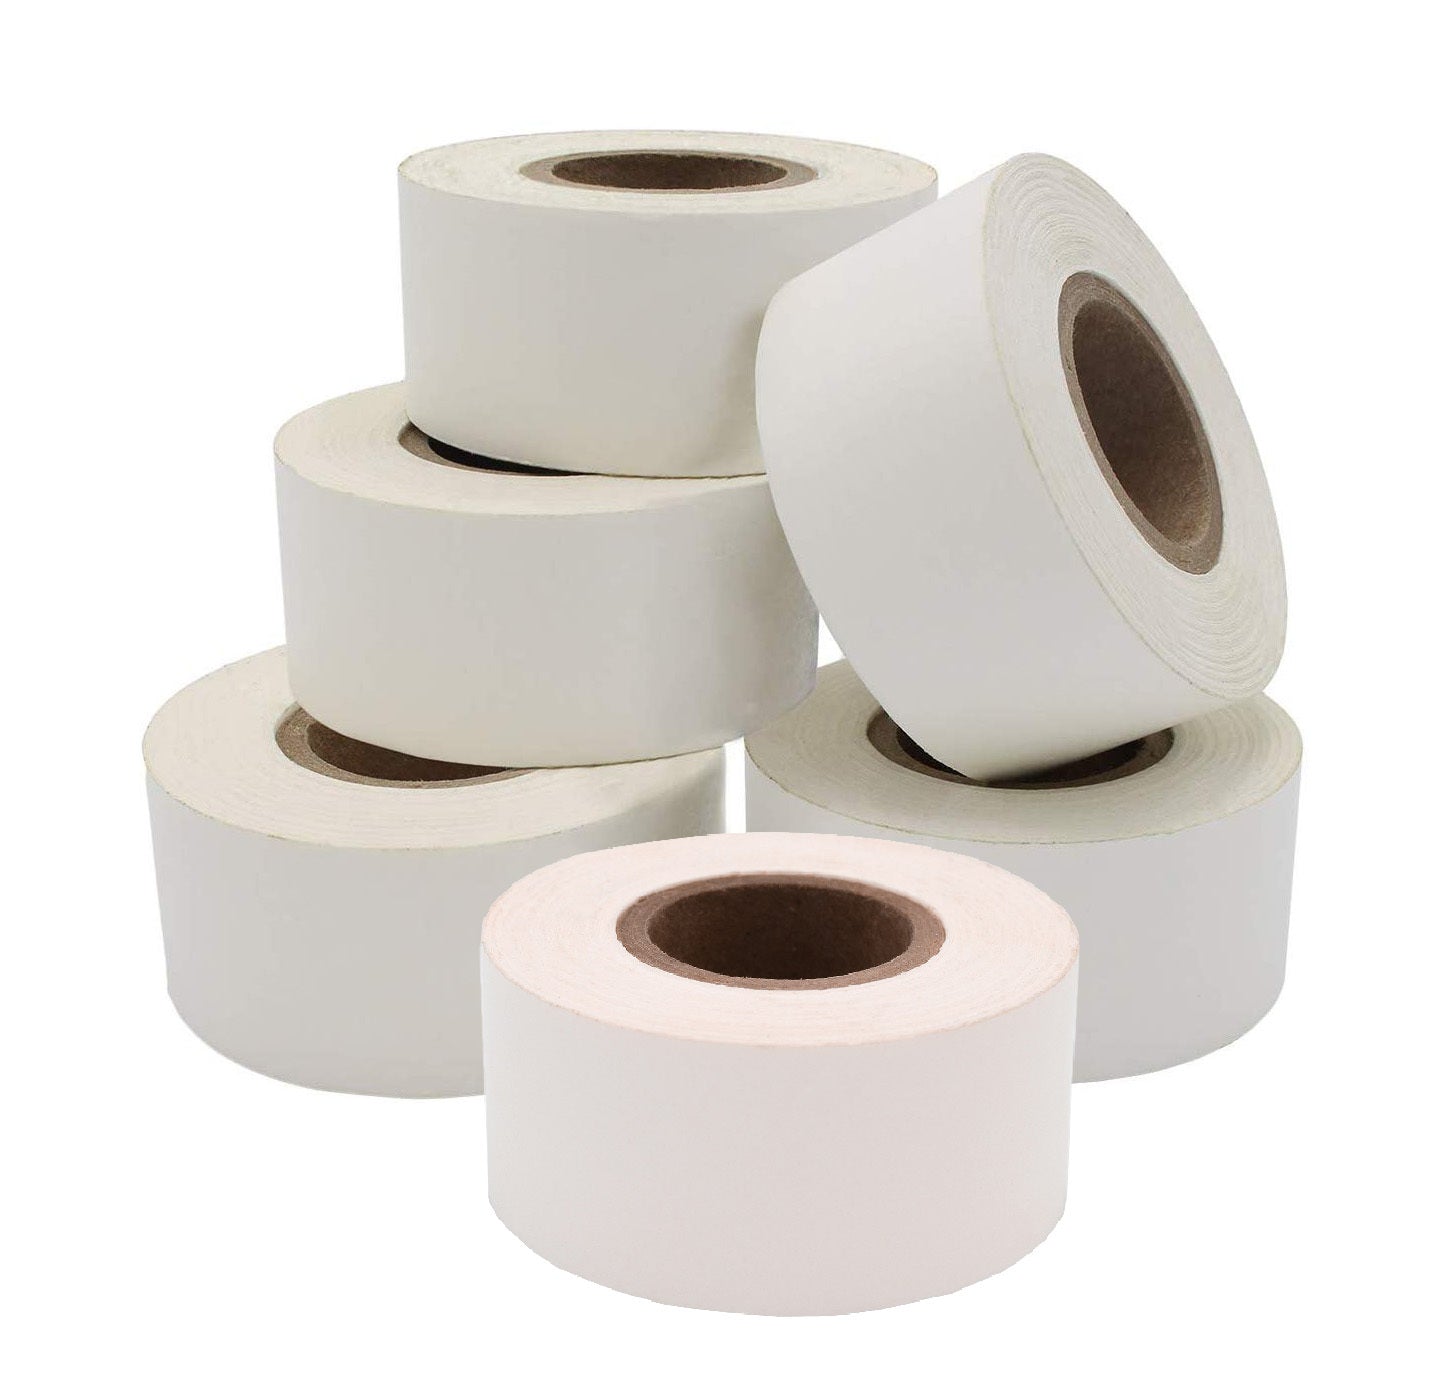 1 x 500 Removable Tape Value Pack, White, 6 Rolls, 500/Roll